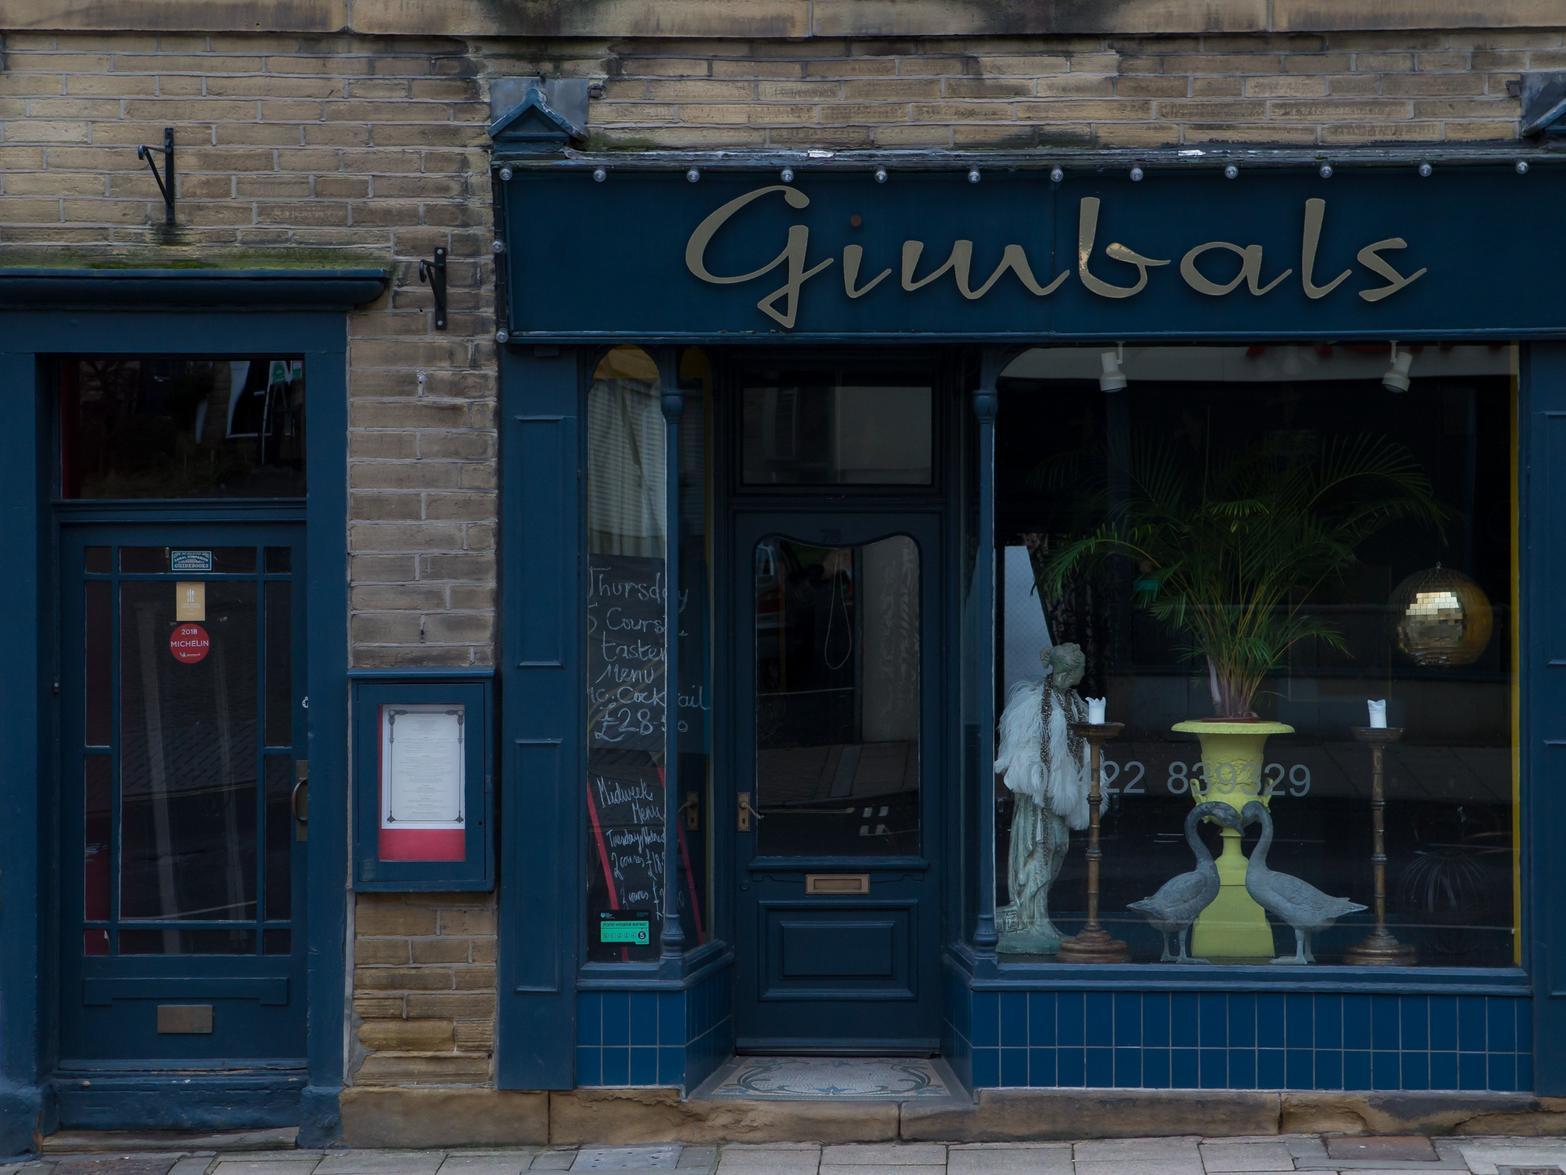 This restaurant has been a staple in Sowerby Bridge since 1995 and offers rustic dishes with a modern twist. The dishes on offer are inspired by the seasons.